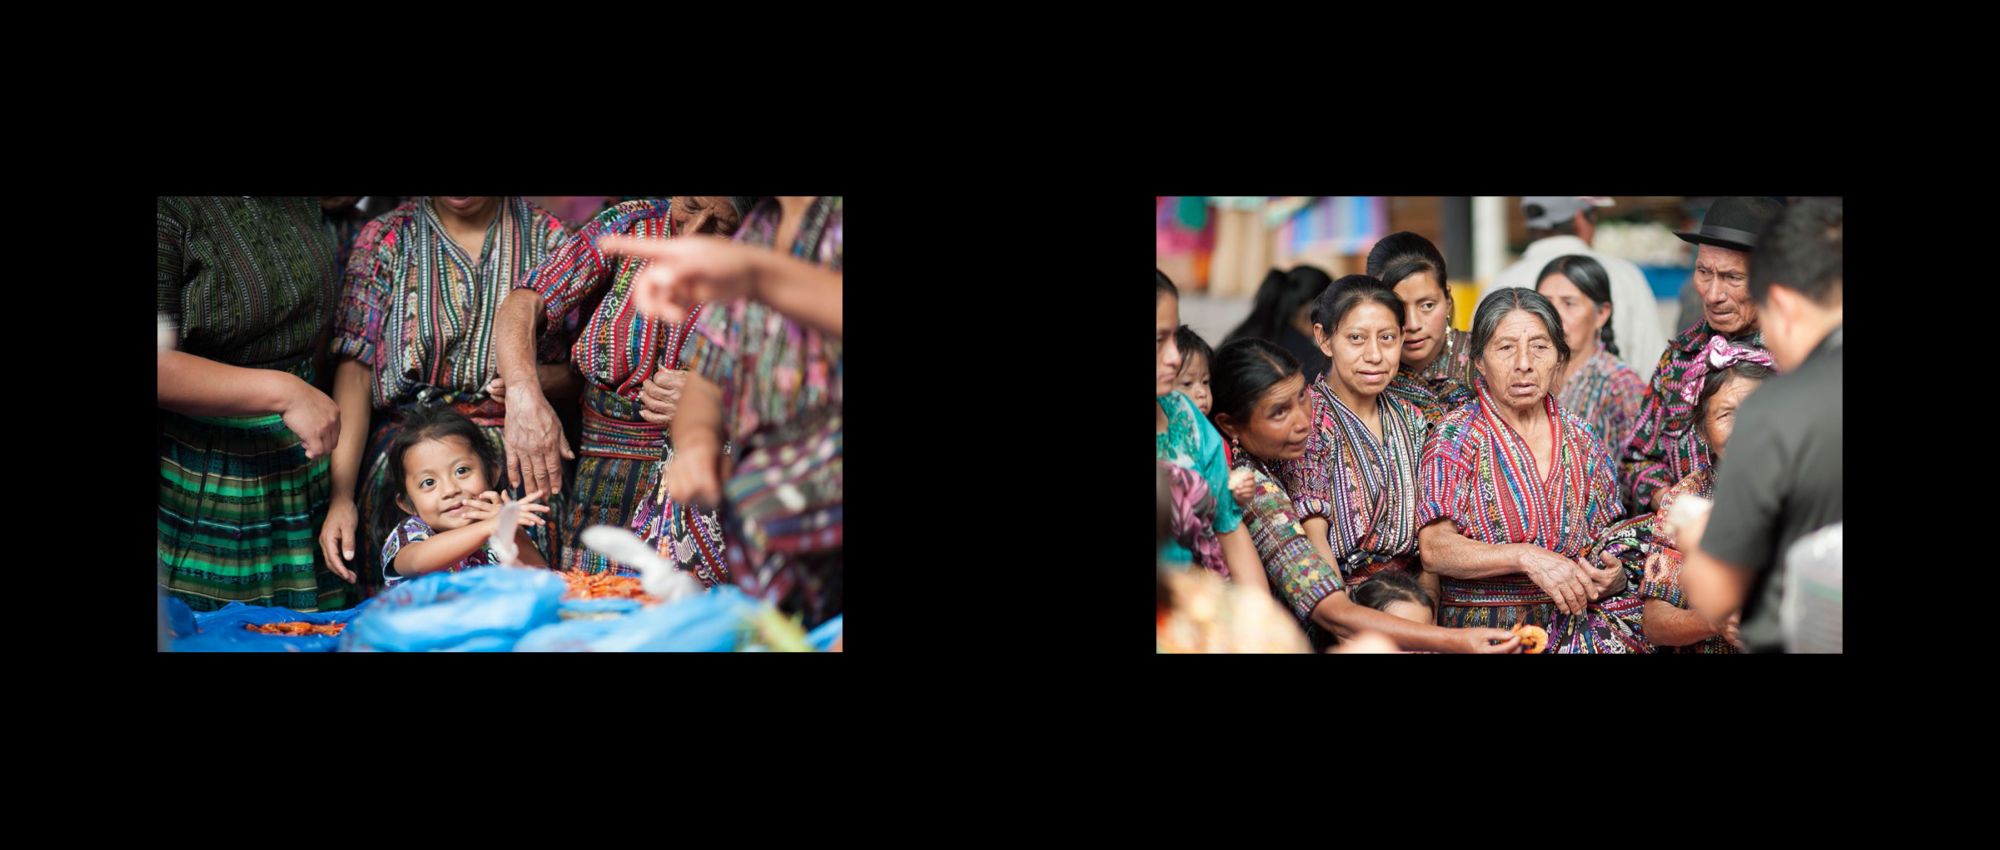 Guatemala Album - Pages 66-67: Women at the market